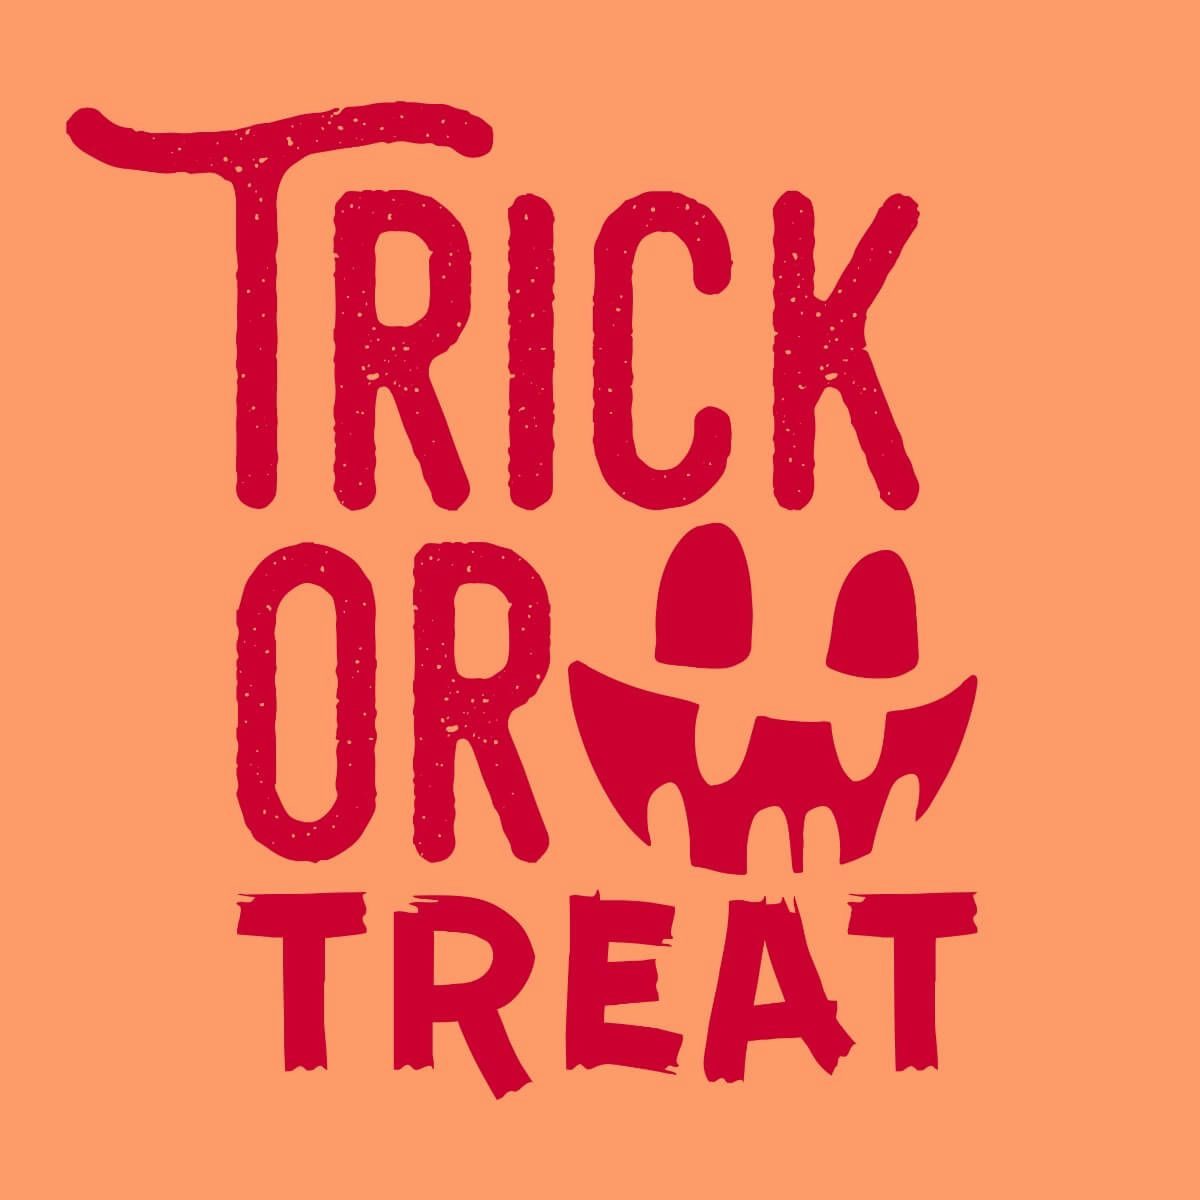 Card Trick or Treat